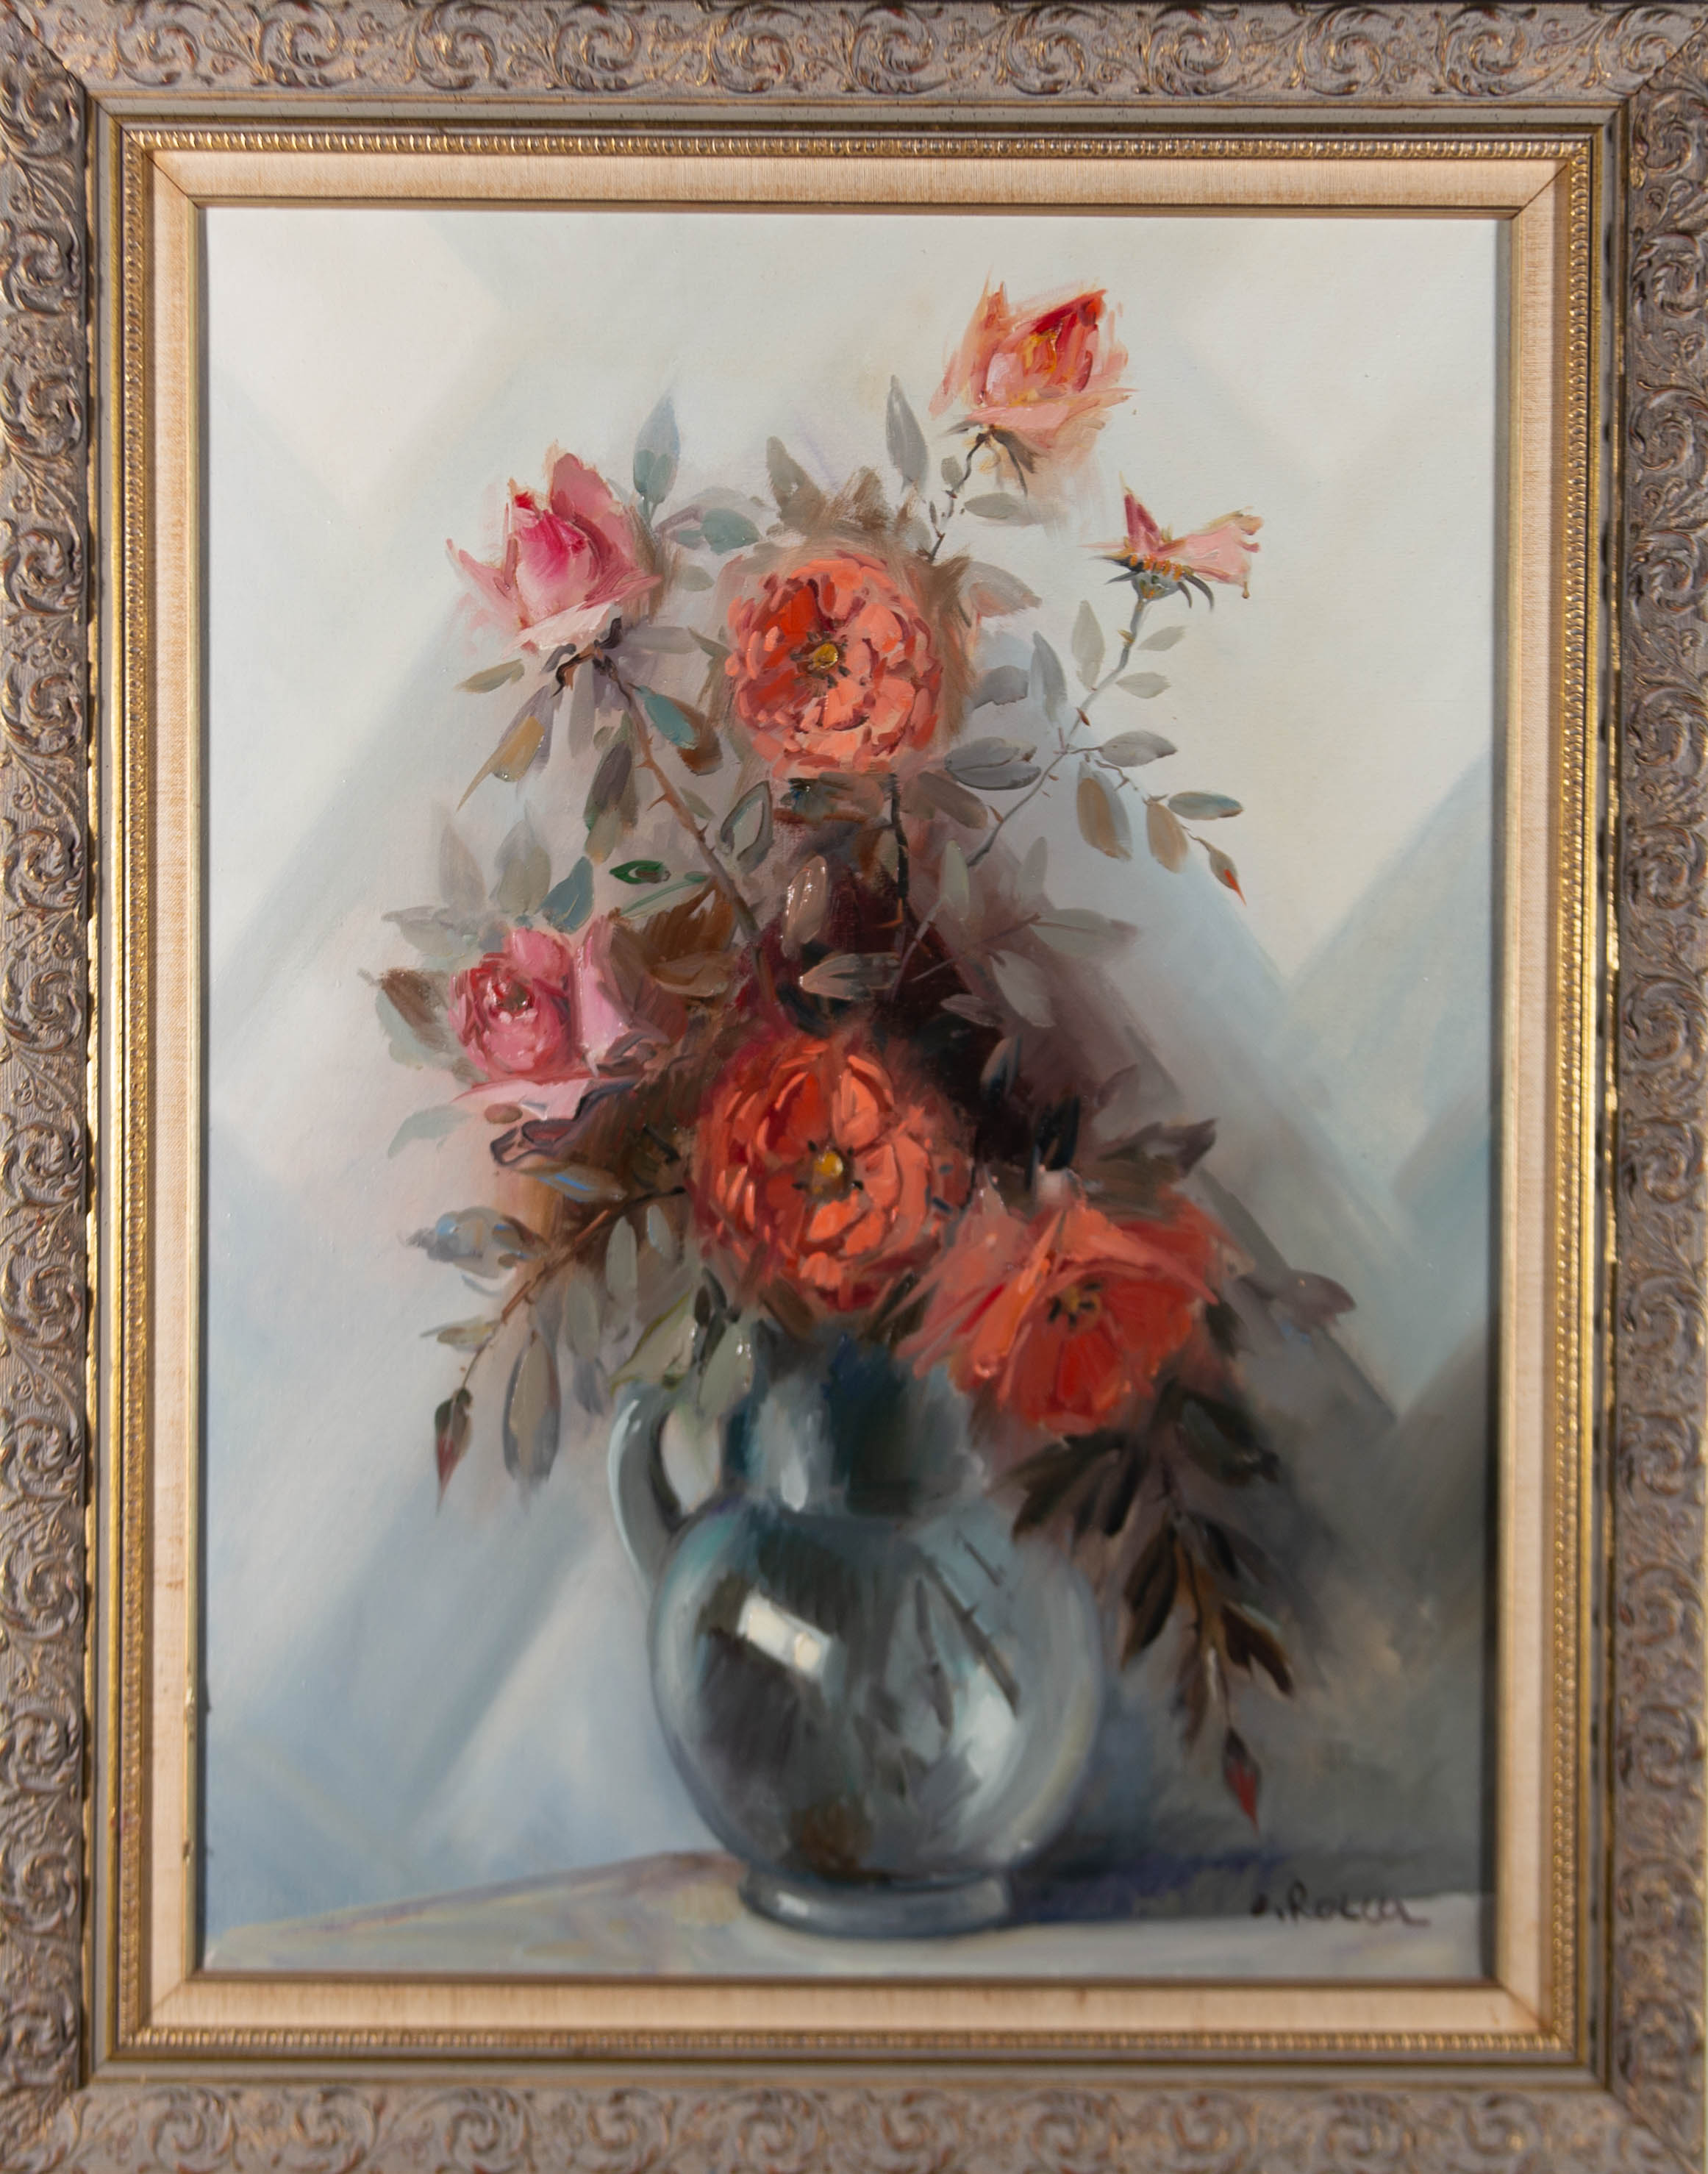 Contemporary Oil - Coral Roses: Signed by Author(s) Art / Print ...